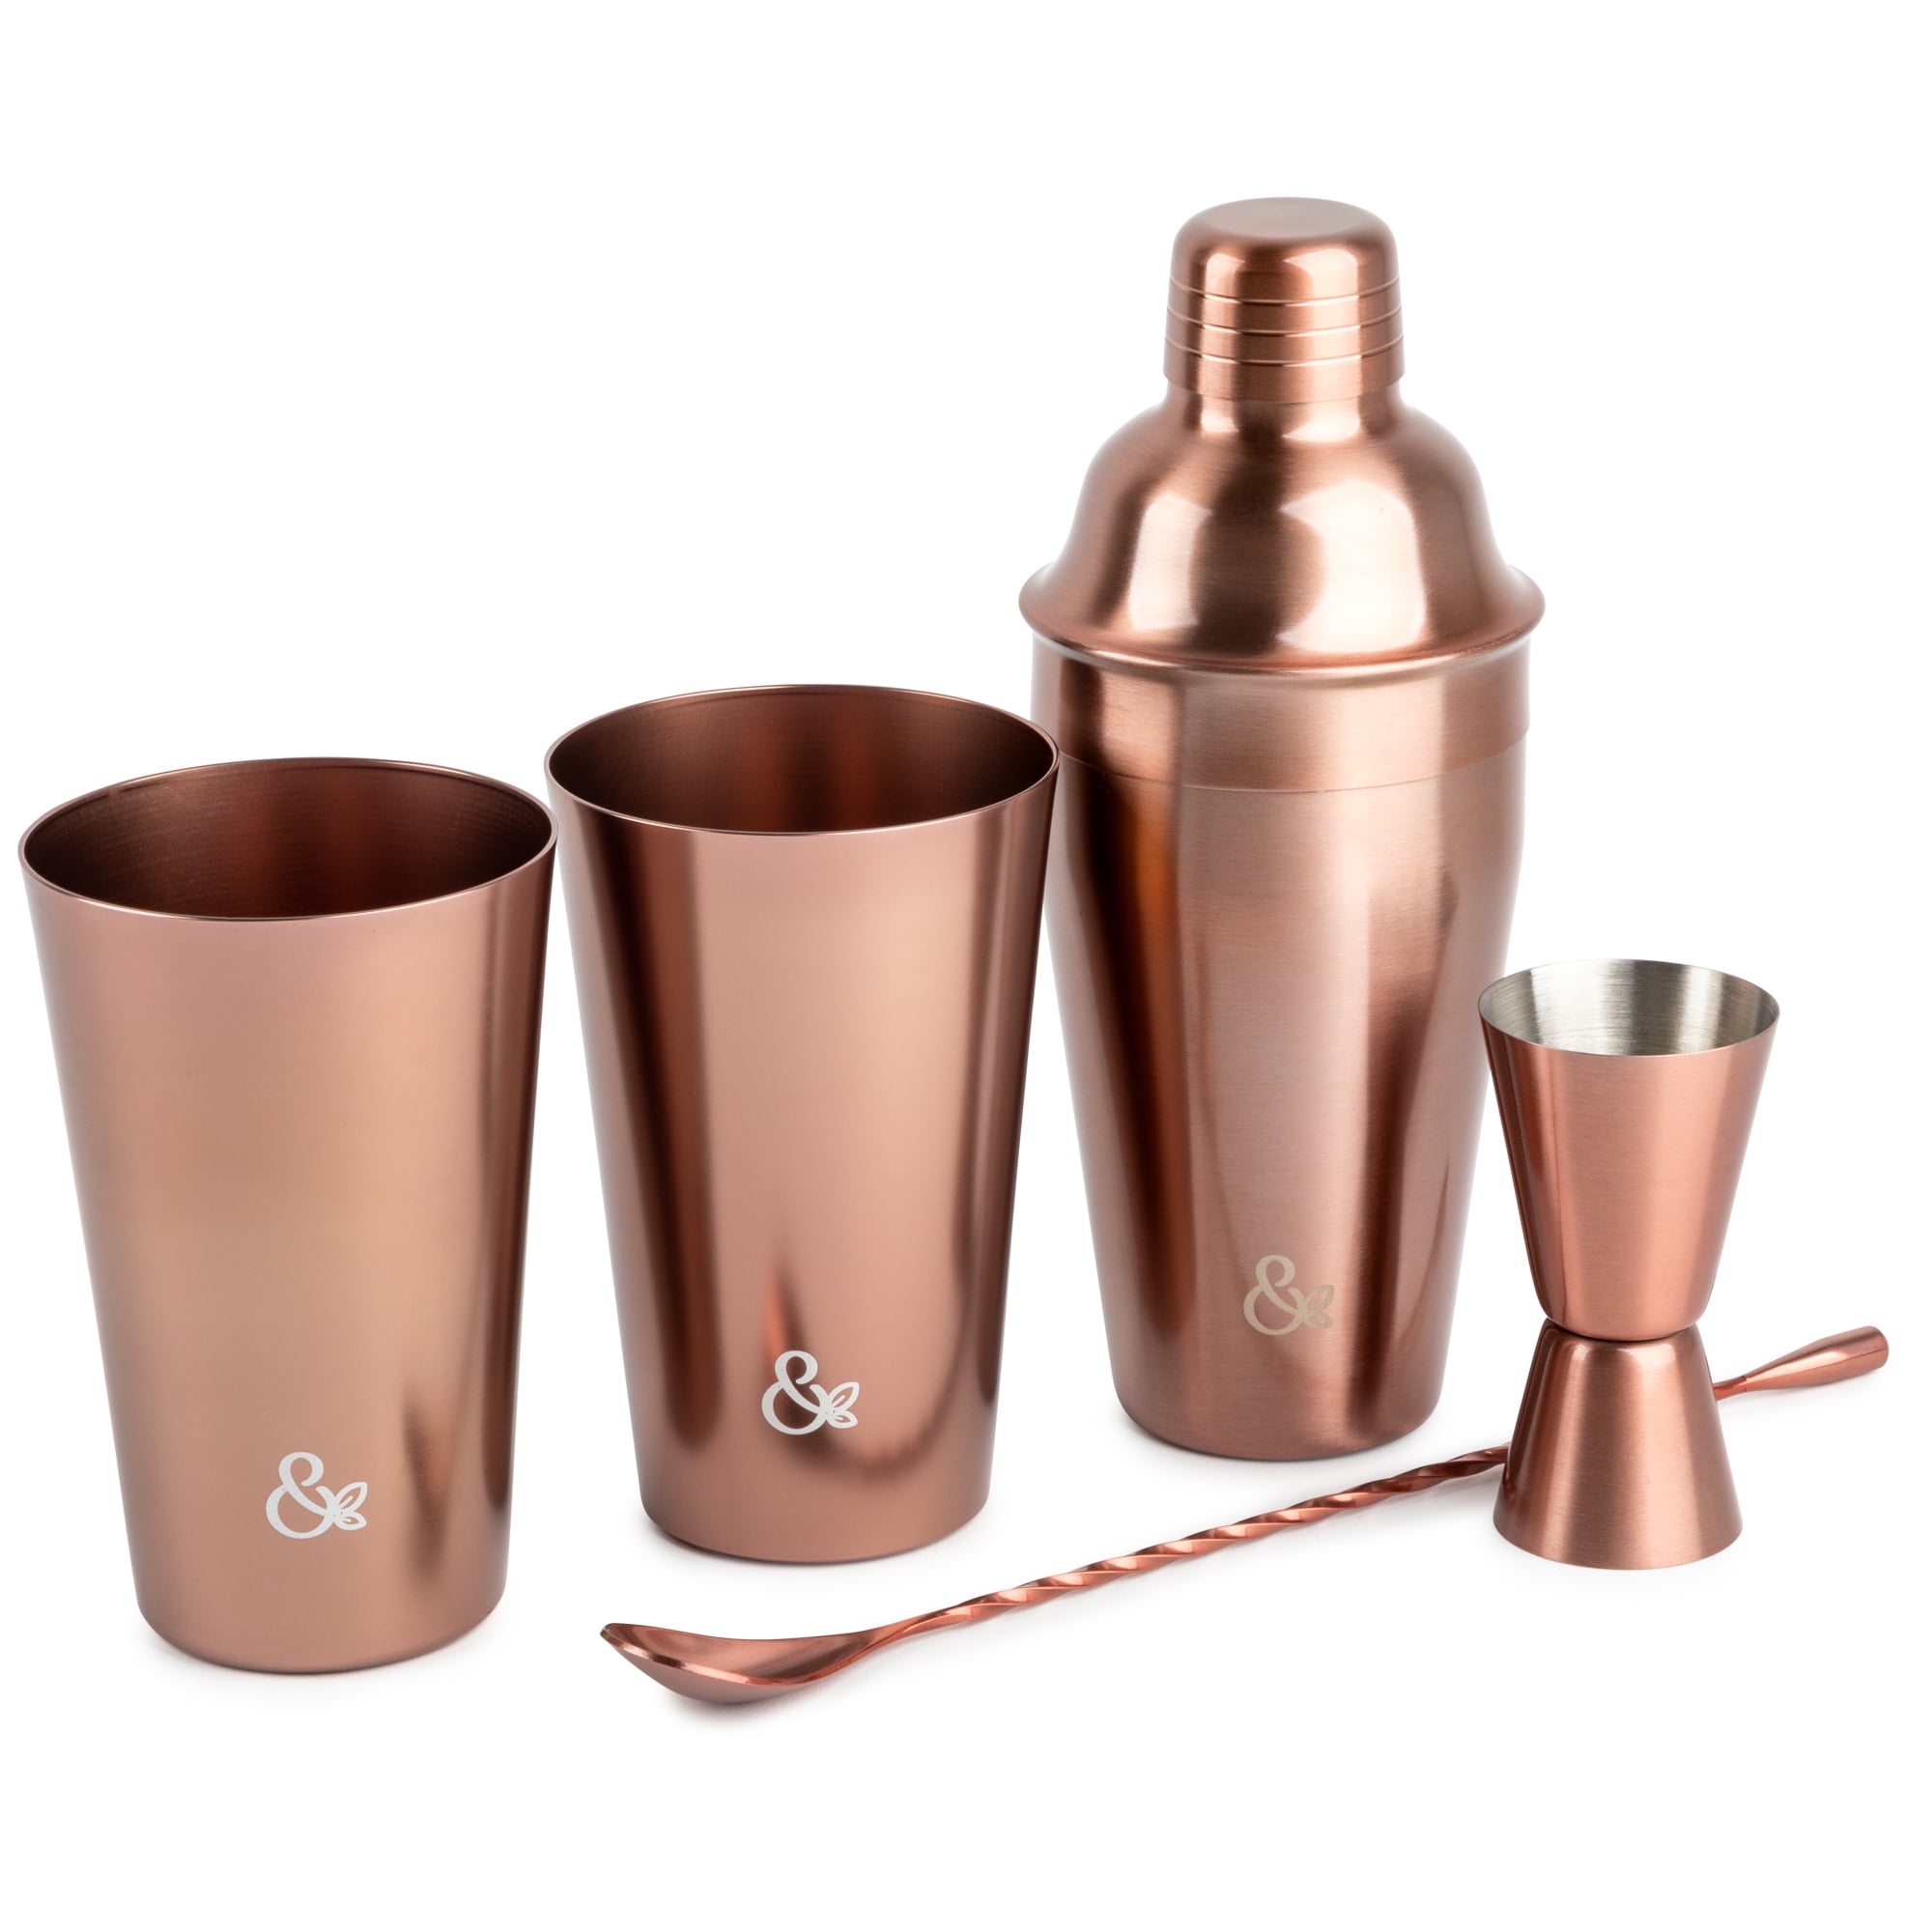 Rose Gold 9 Recipe Cocktail Shaker Glass Stainless Steel Bar Drink Mixer Tumbler 